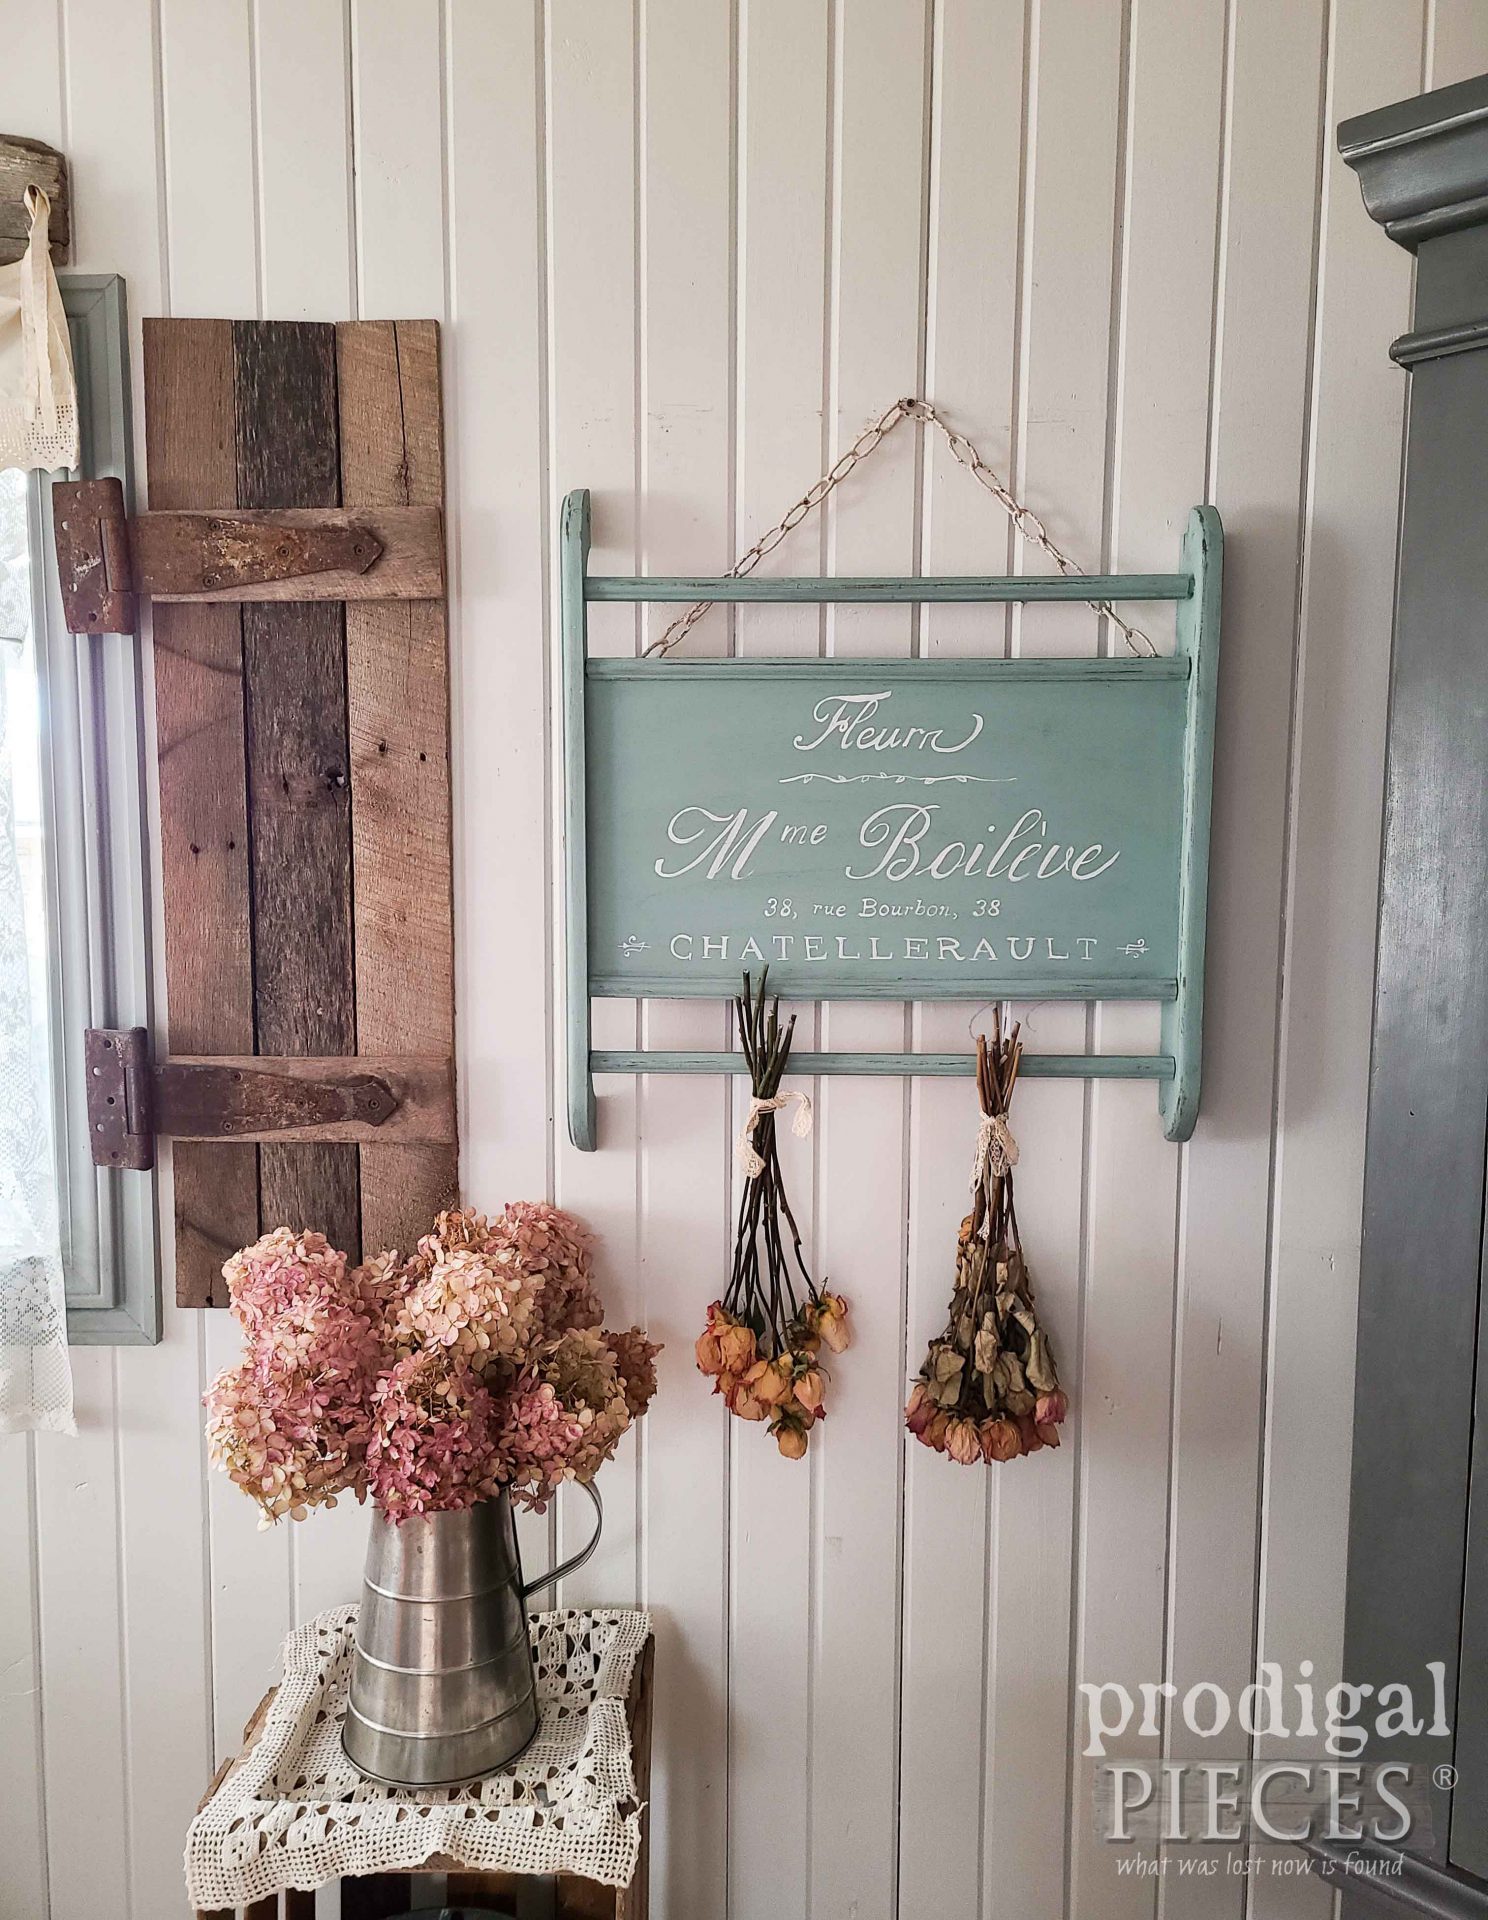 DIY French Flower Shop Sign from a Vintage Baby Crib Upcycled by Larissa of Prodigal Pieces | prodigalpieces.com #prodigalpieces #farmhouse #french #diy